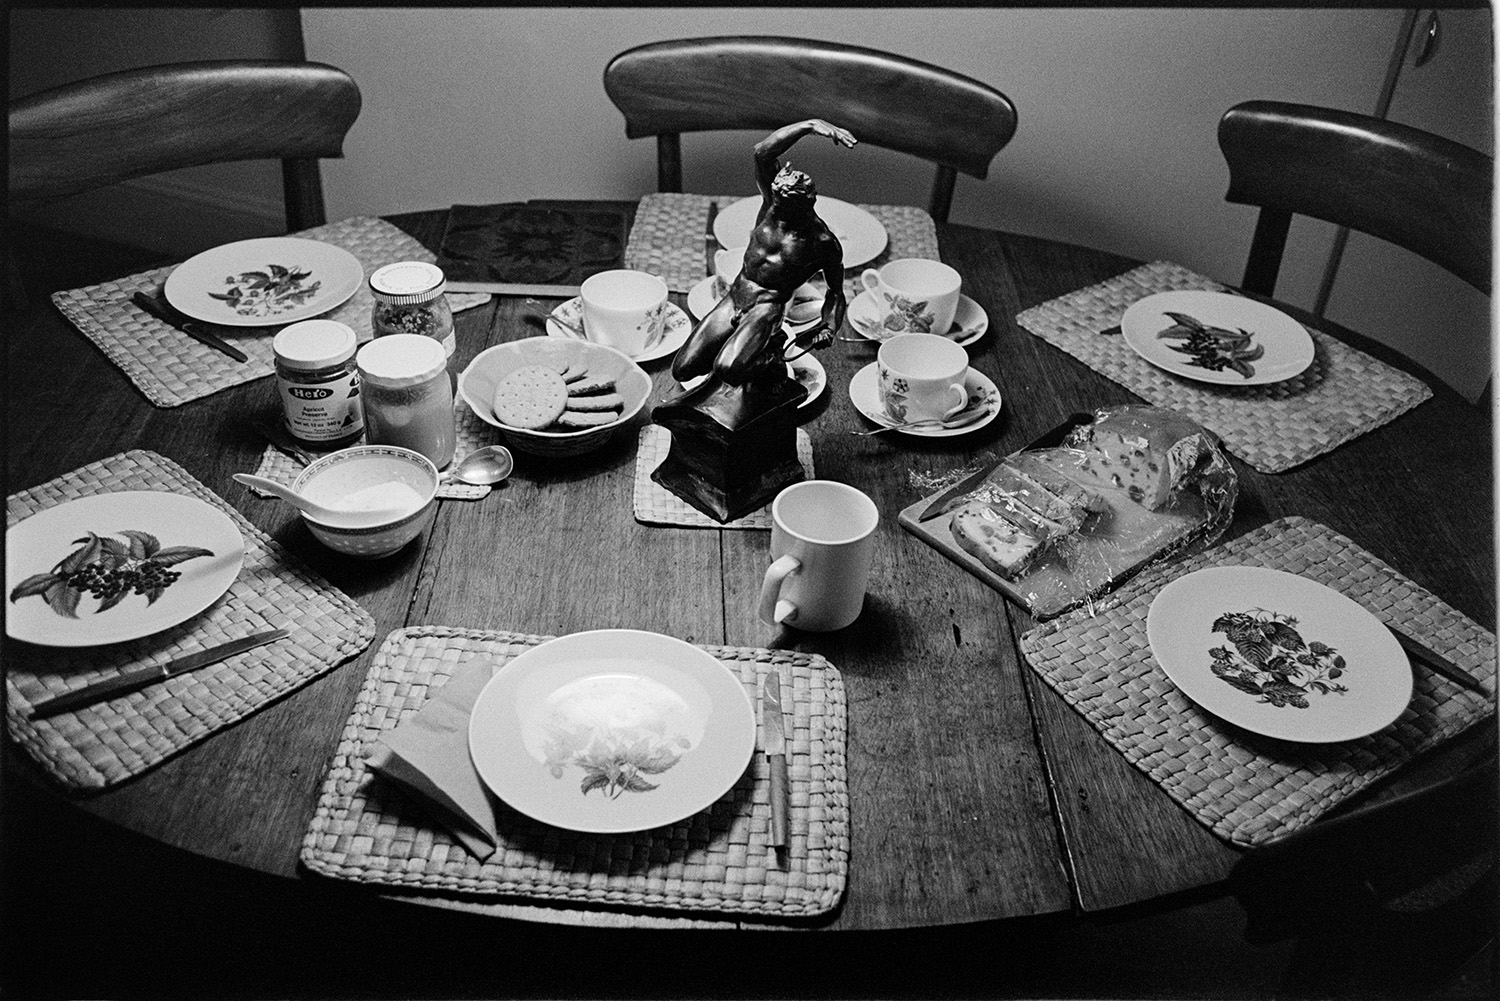 Table laid for tea, mugs, plates. 
[A table laid for tea with plates, cups, cake and biscuits in the house of Orea Purnell at Hartland. A statue of a man is in the centre of the table.]